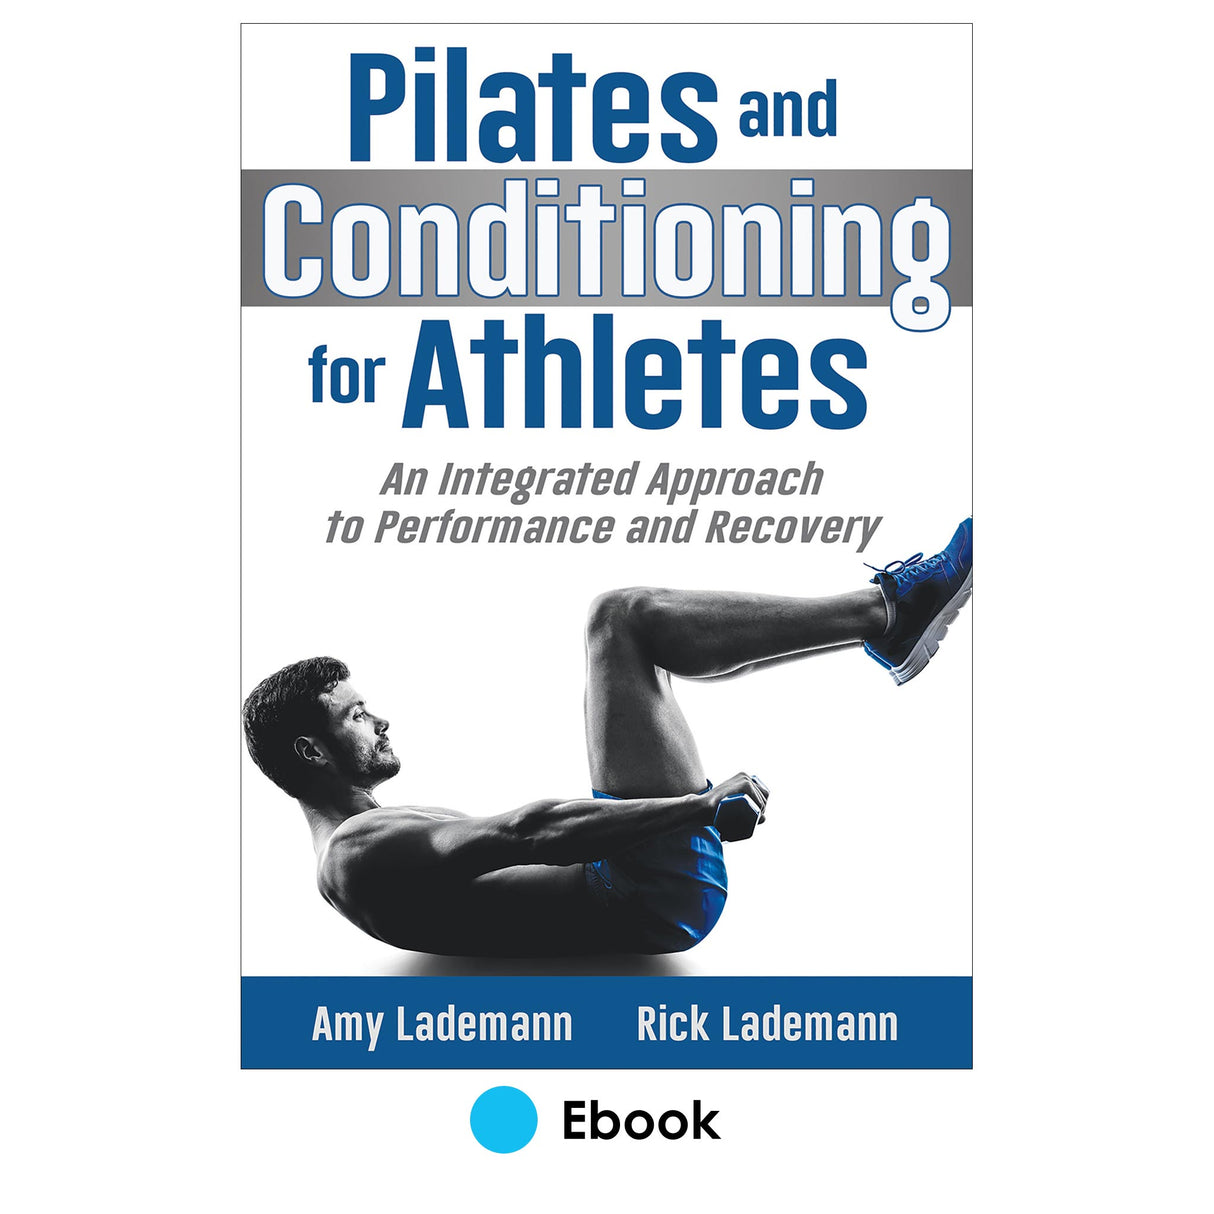 Pilates and Conditioning for Athletes epub